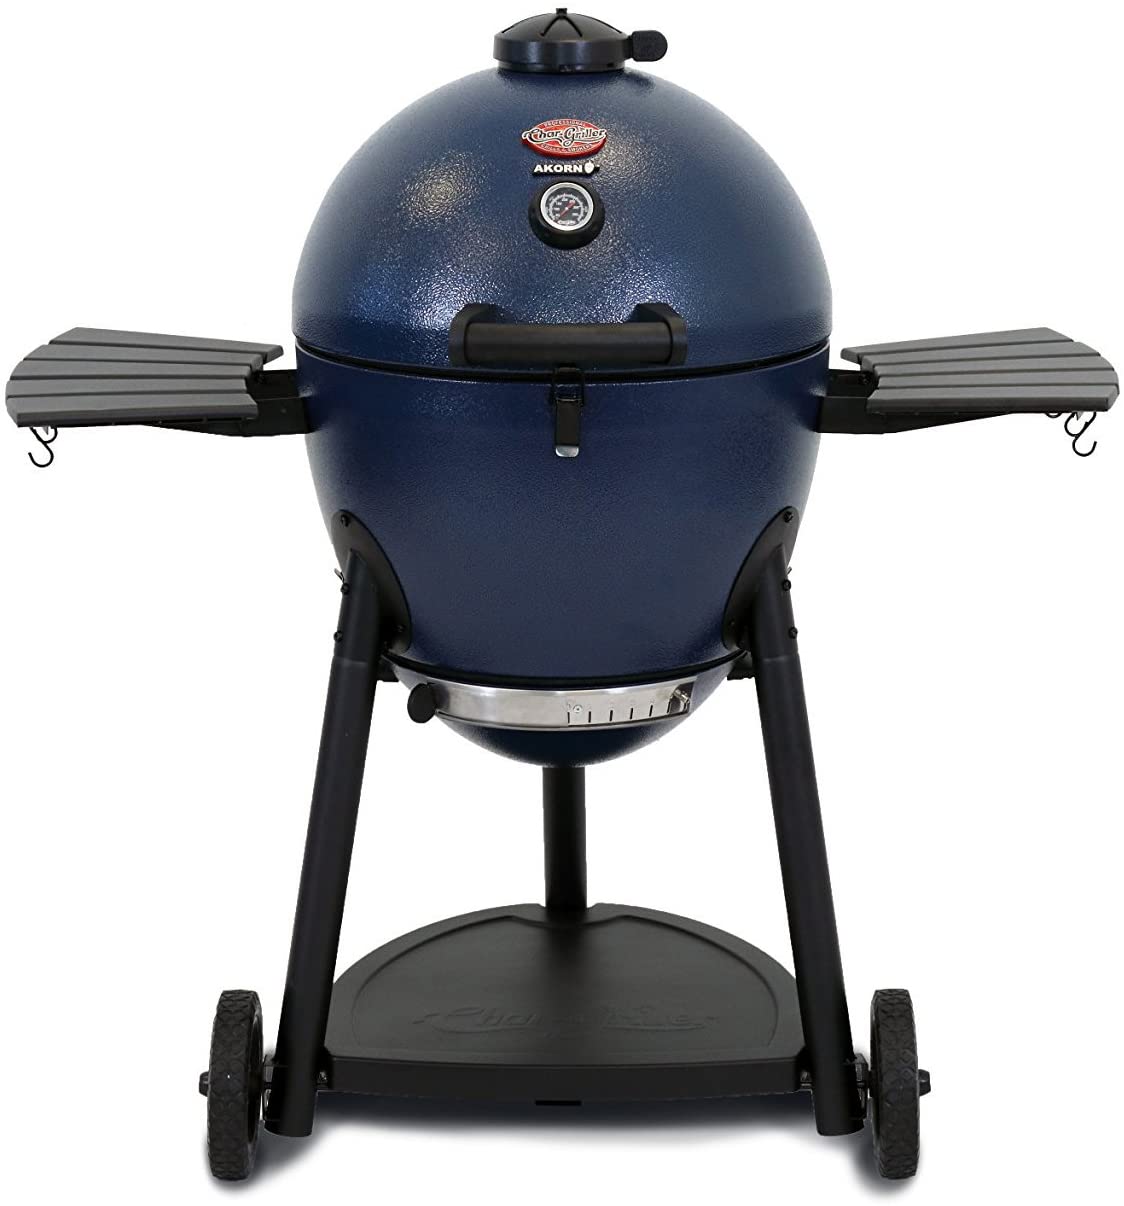  Char-Griller E56720 AKORN Kamado Charcoal Grill, Pack of 1, Blue